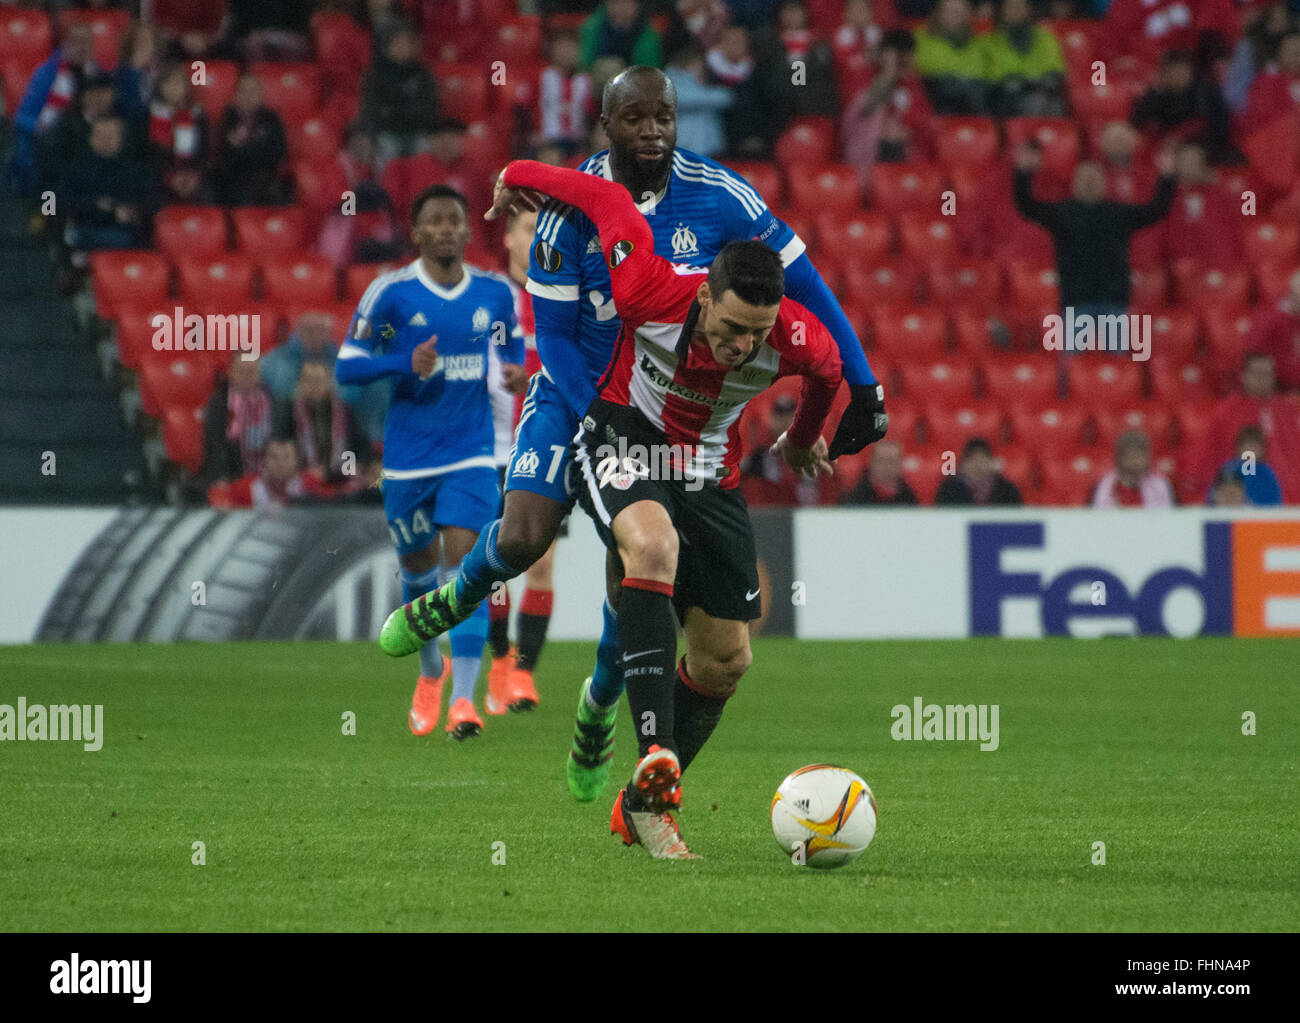 Bilbao, Spain. 25th February, 2016. Aritz Aduriz (Athletic Club) in action covered by Lassana Diarra (Olympique Marseille) during football match of UEFA Europe League between Athletic Club and Olympique de Marseille at San Mames Stadium on February 25, 2016 in Bilbao, Spain. Credit:  David Gato/Alamy Live News Stock Photo